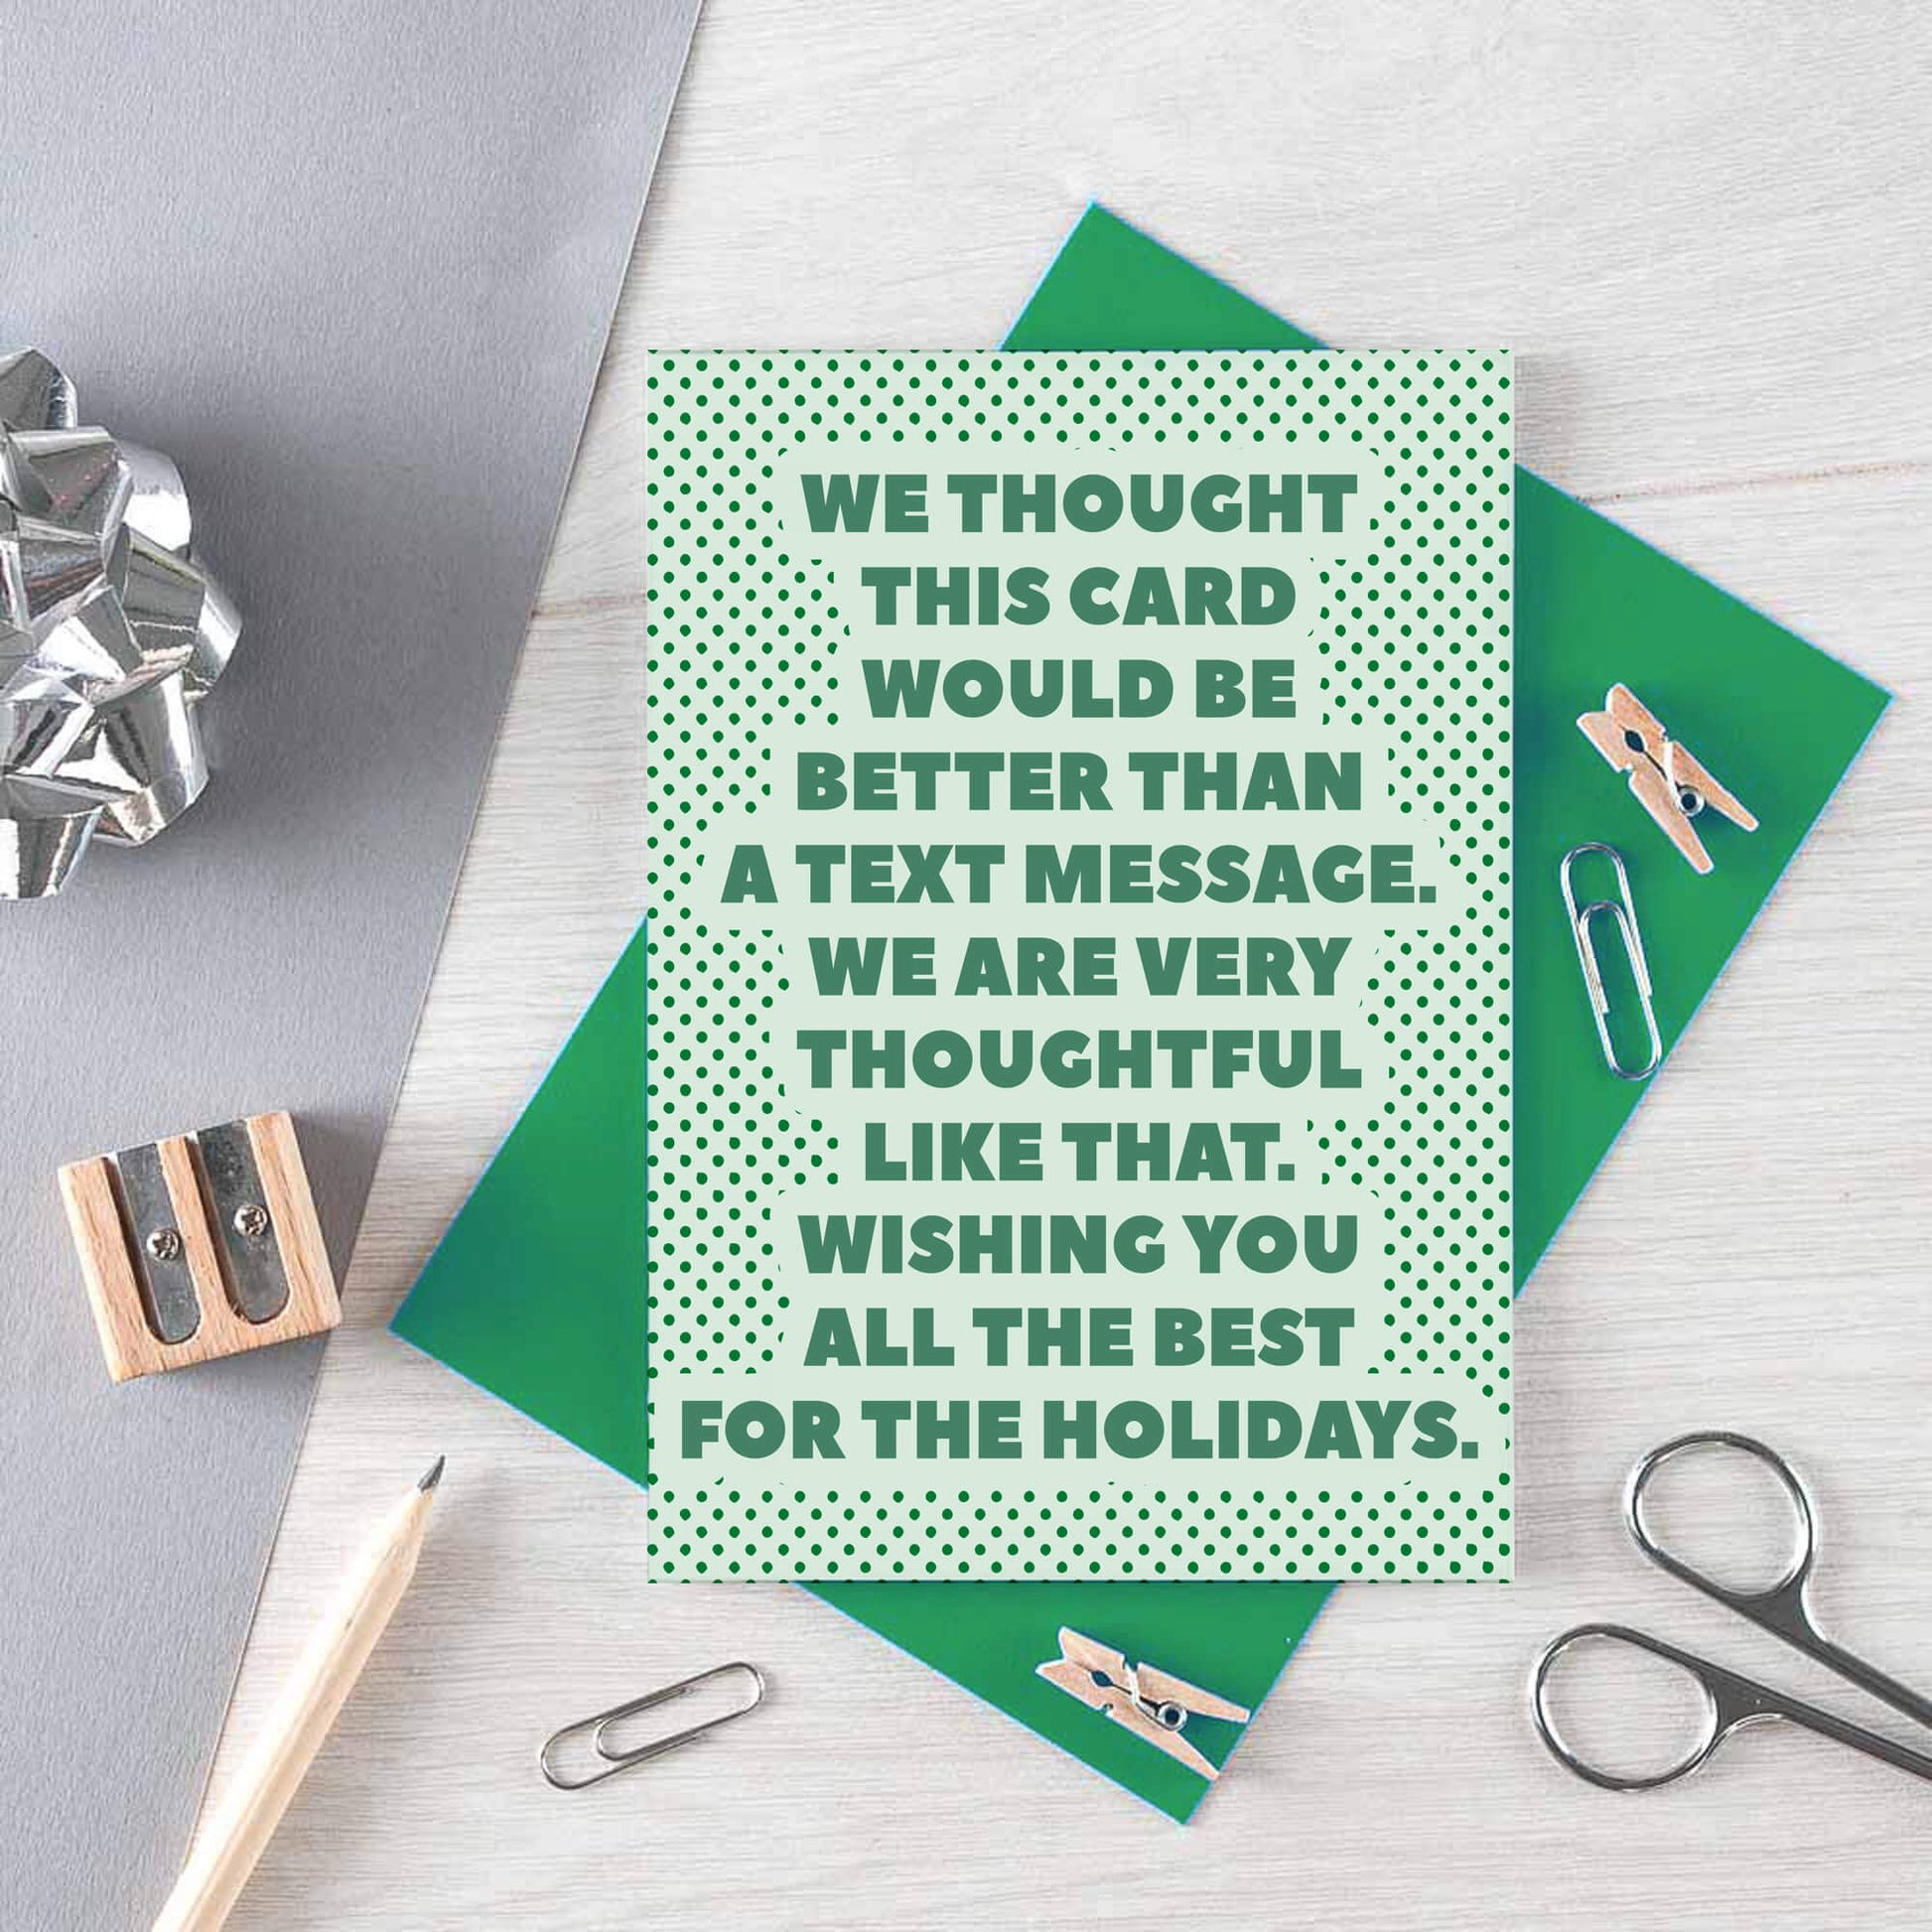 Christmas Card by SixElevenCreations. Reads We thought this card would be better than a text message. We are very thoughtful like that. Wishing you all the best for the holidays. Product Code SEC0073A6